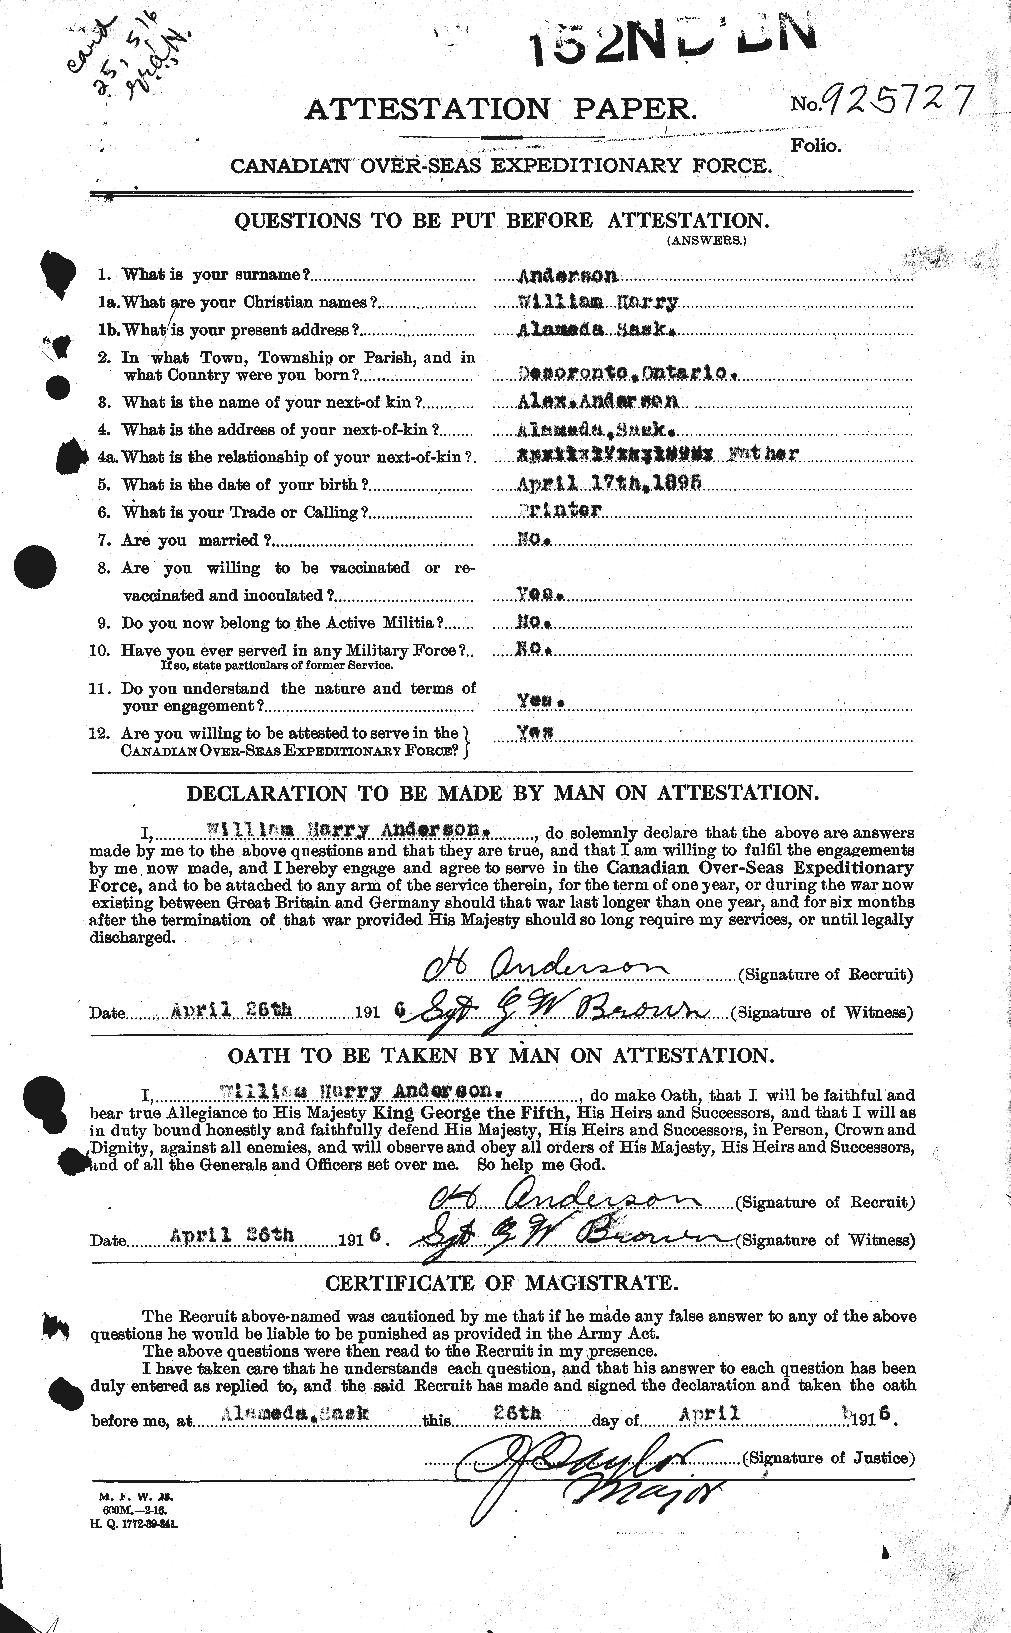 Personnel Records of the First World War - CEF 210717a